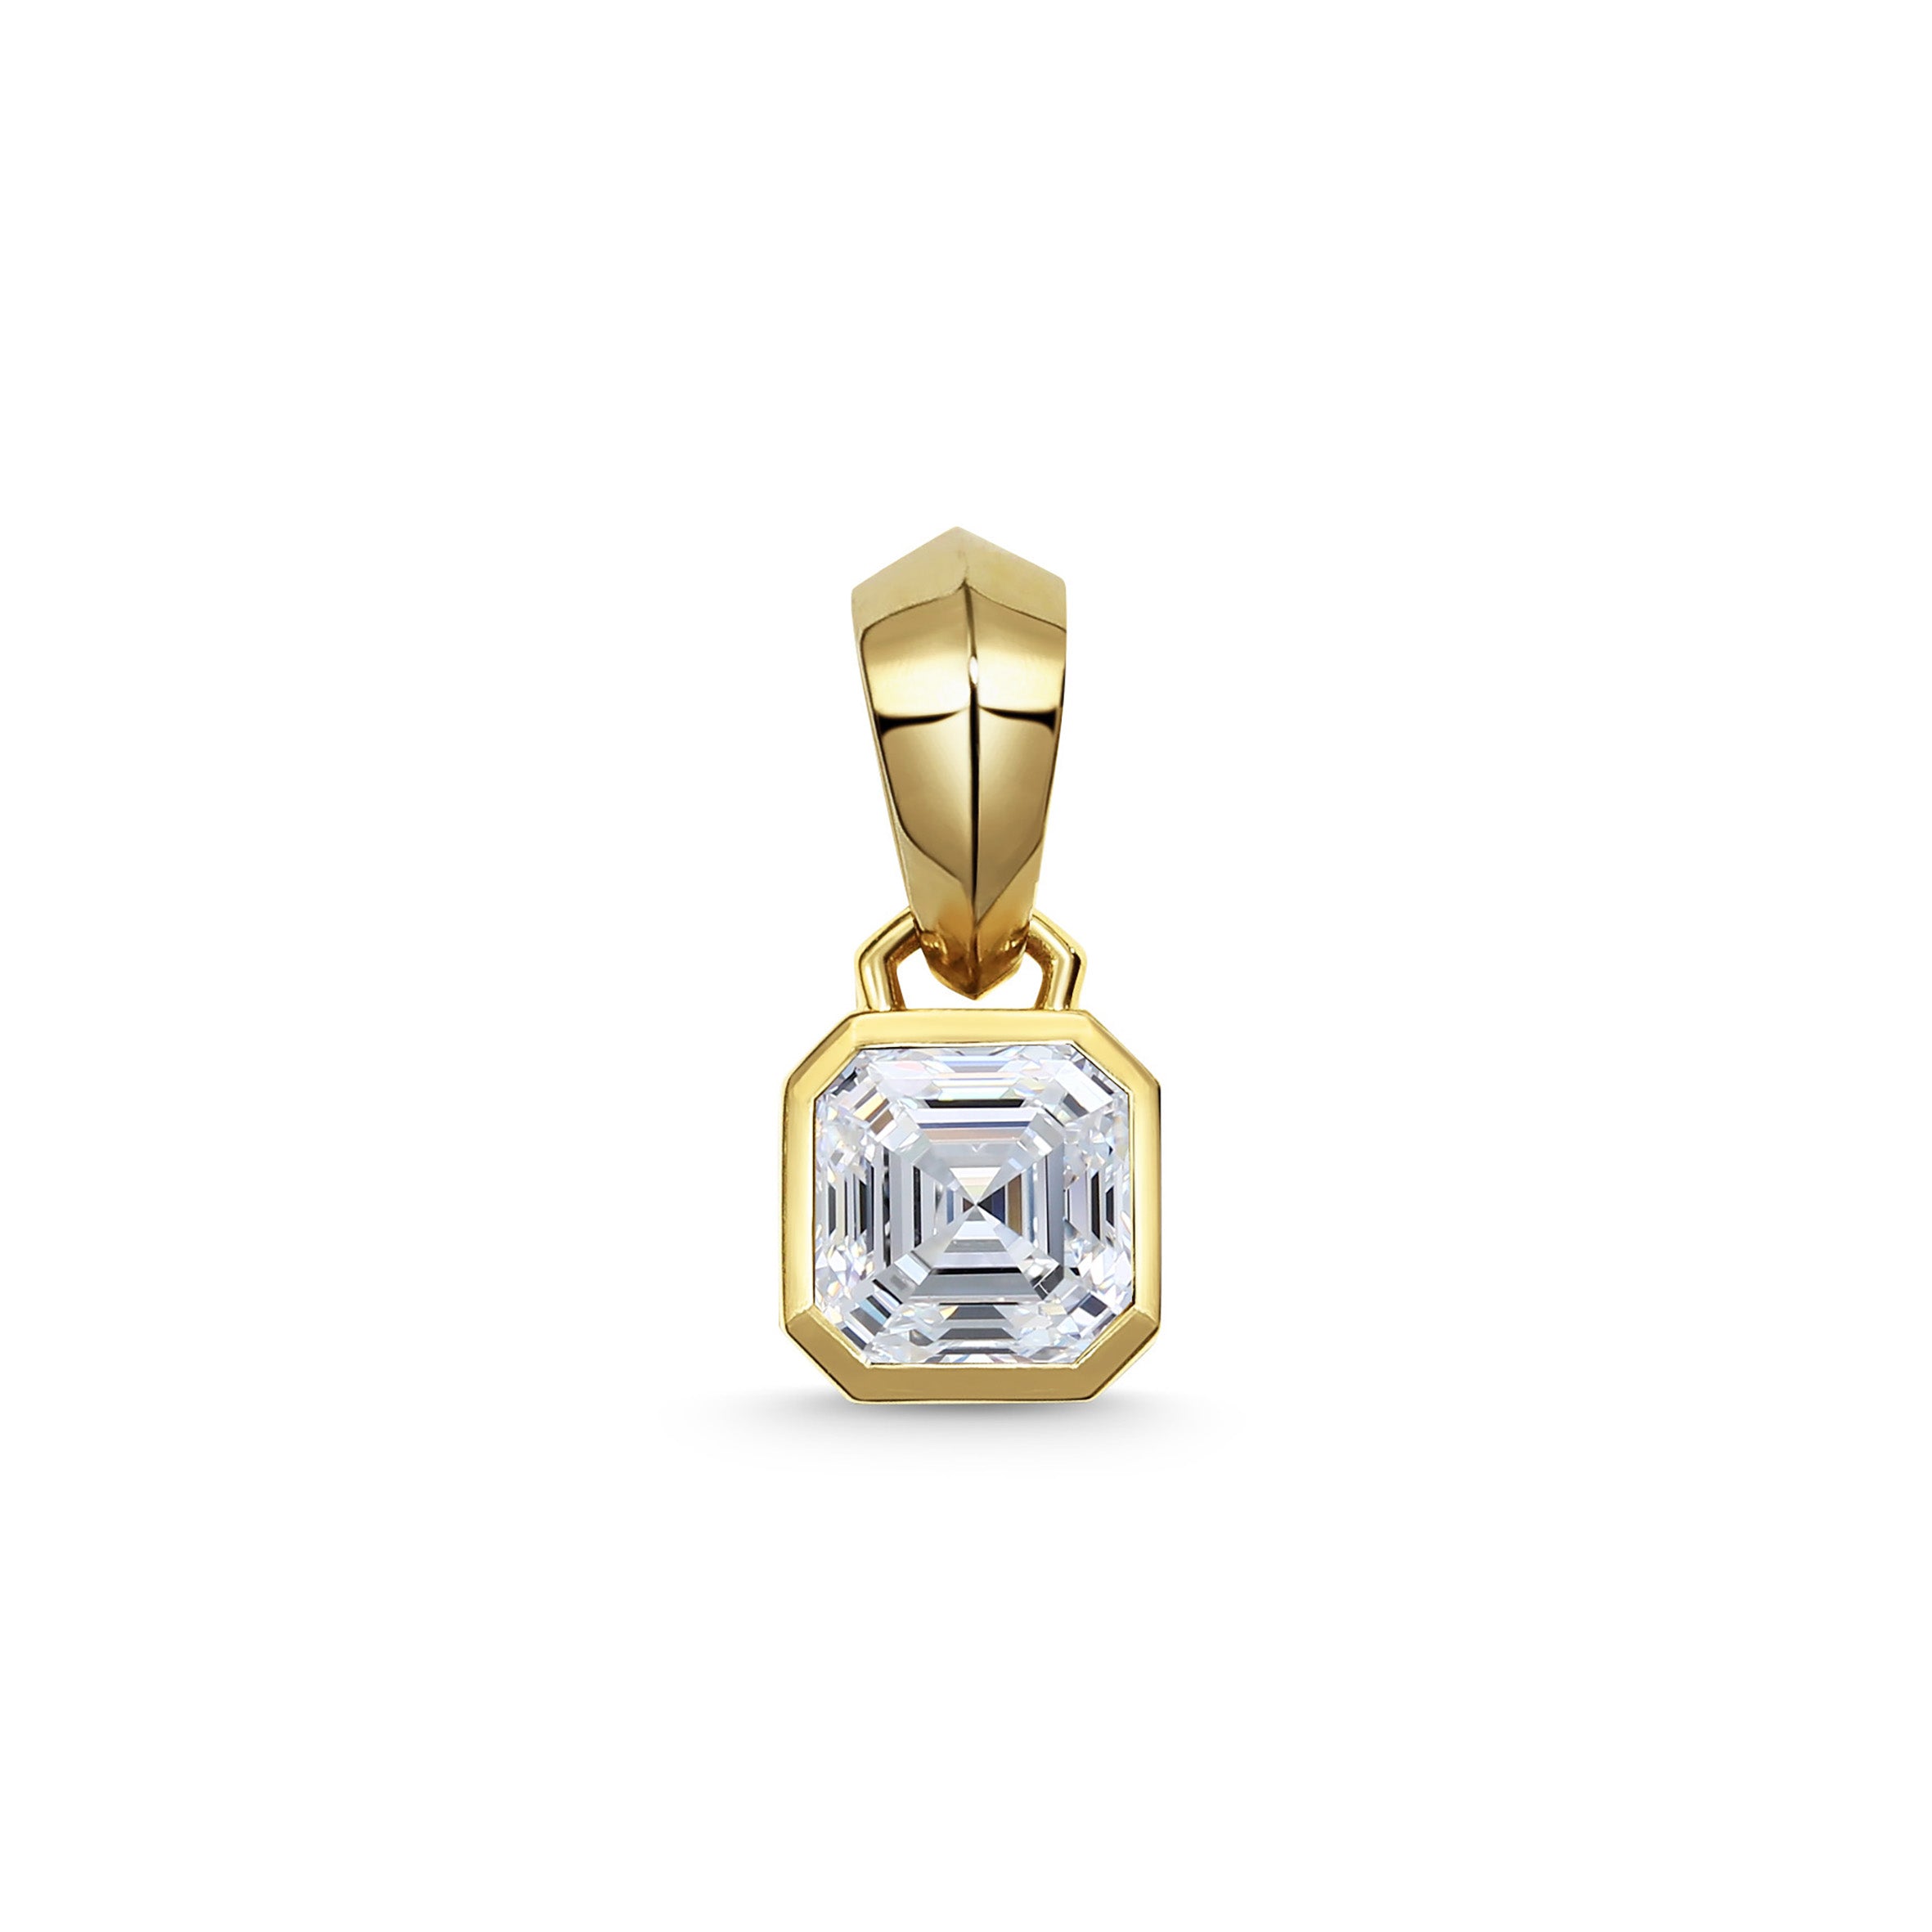 The Chunky Charm Pendant - Asscher Cut by East London jeweller Rachel Boston | Discover our collections of unique and timeless engagement rings, wedding rings, and modern fine jewellery.